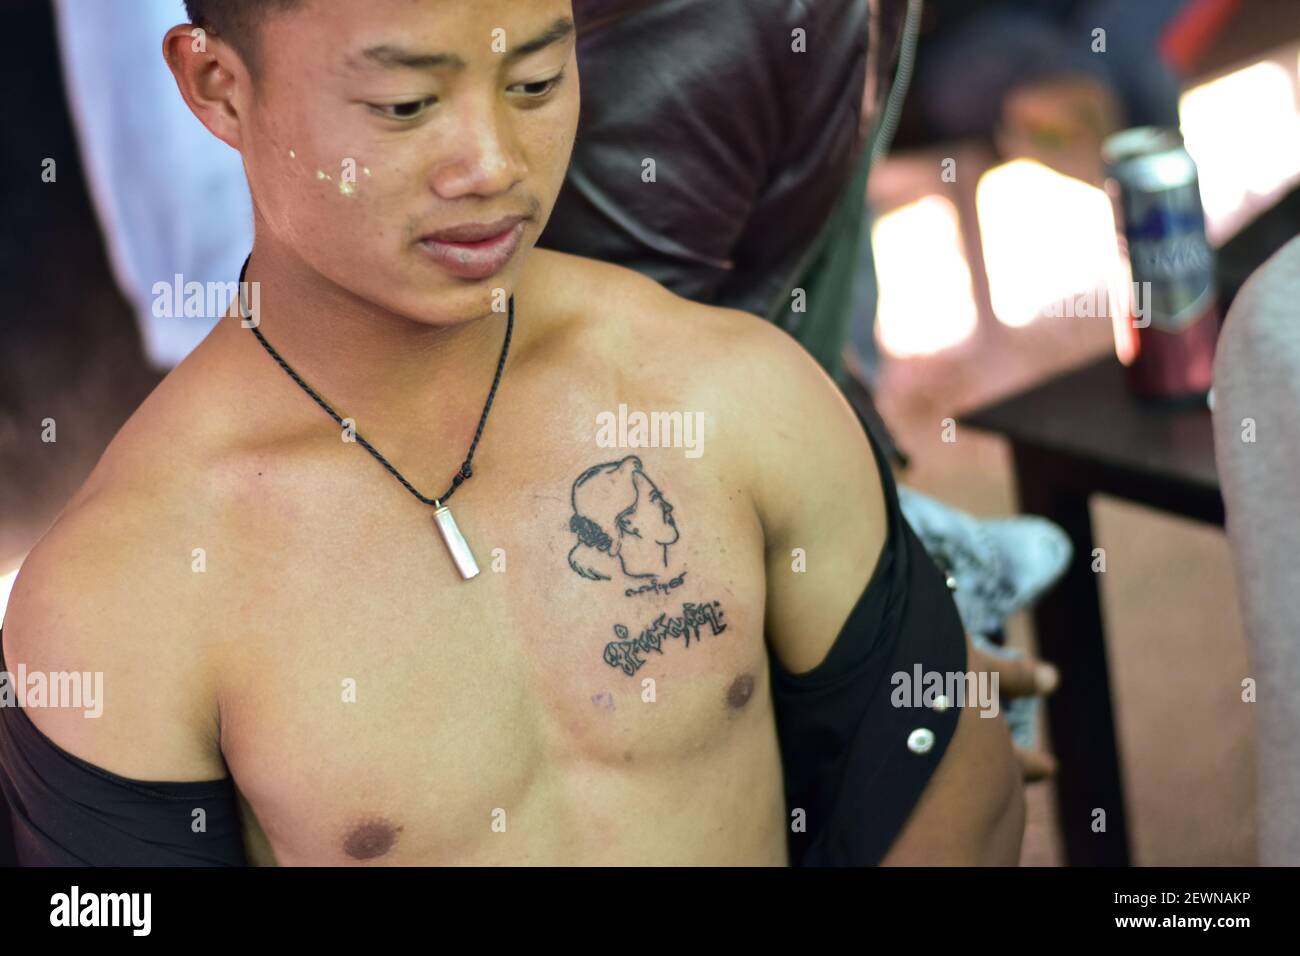 Myanmar, Nyaung Shwe,02 March 2021, : A young man wears a tattooed portrait of Aung San Suu Kyi, the ousted head of Myanmar's government, on his chest. In Myanmar, supporters of the